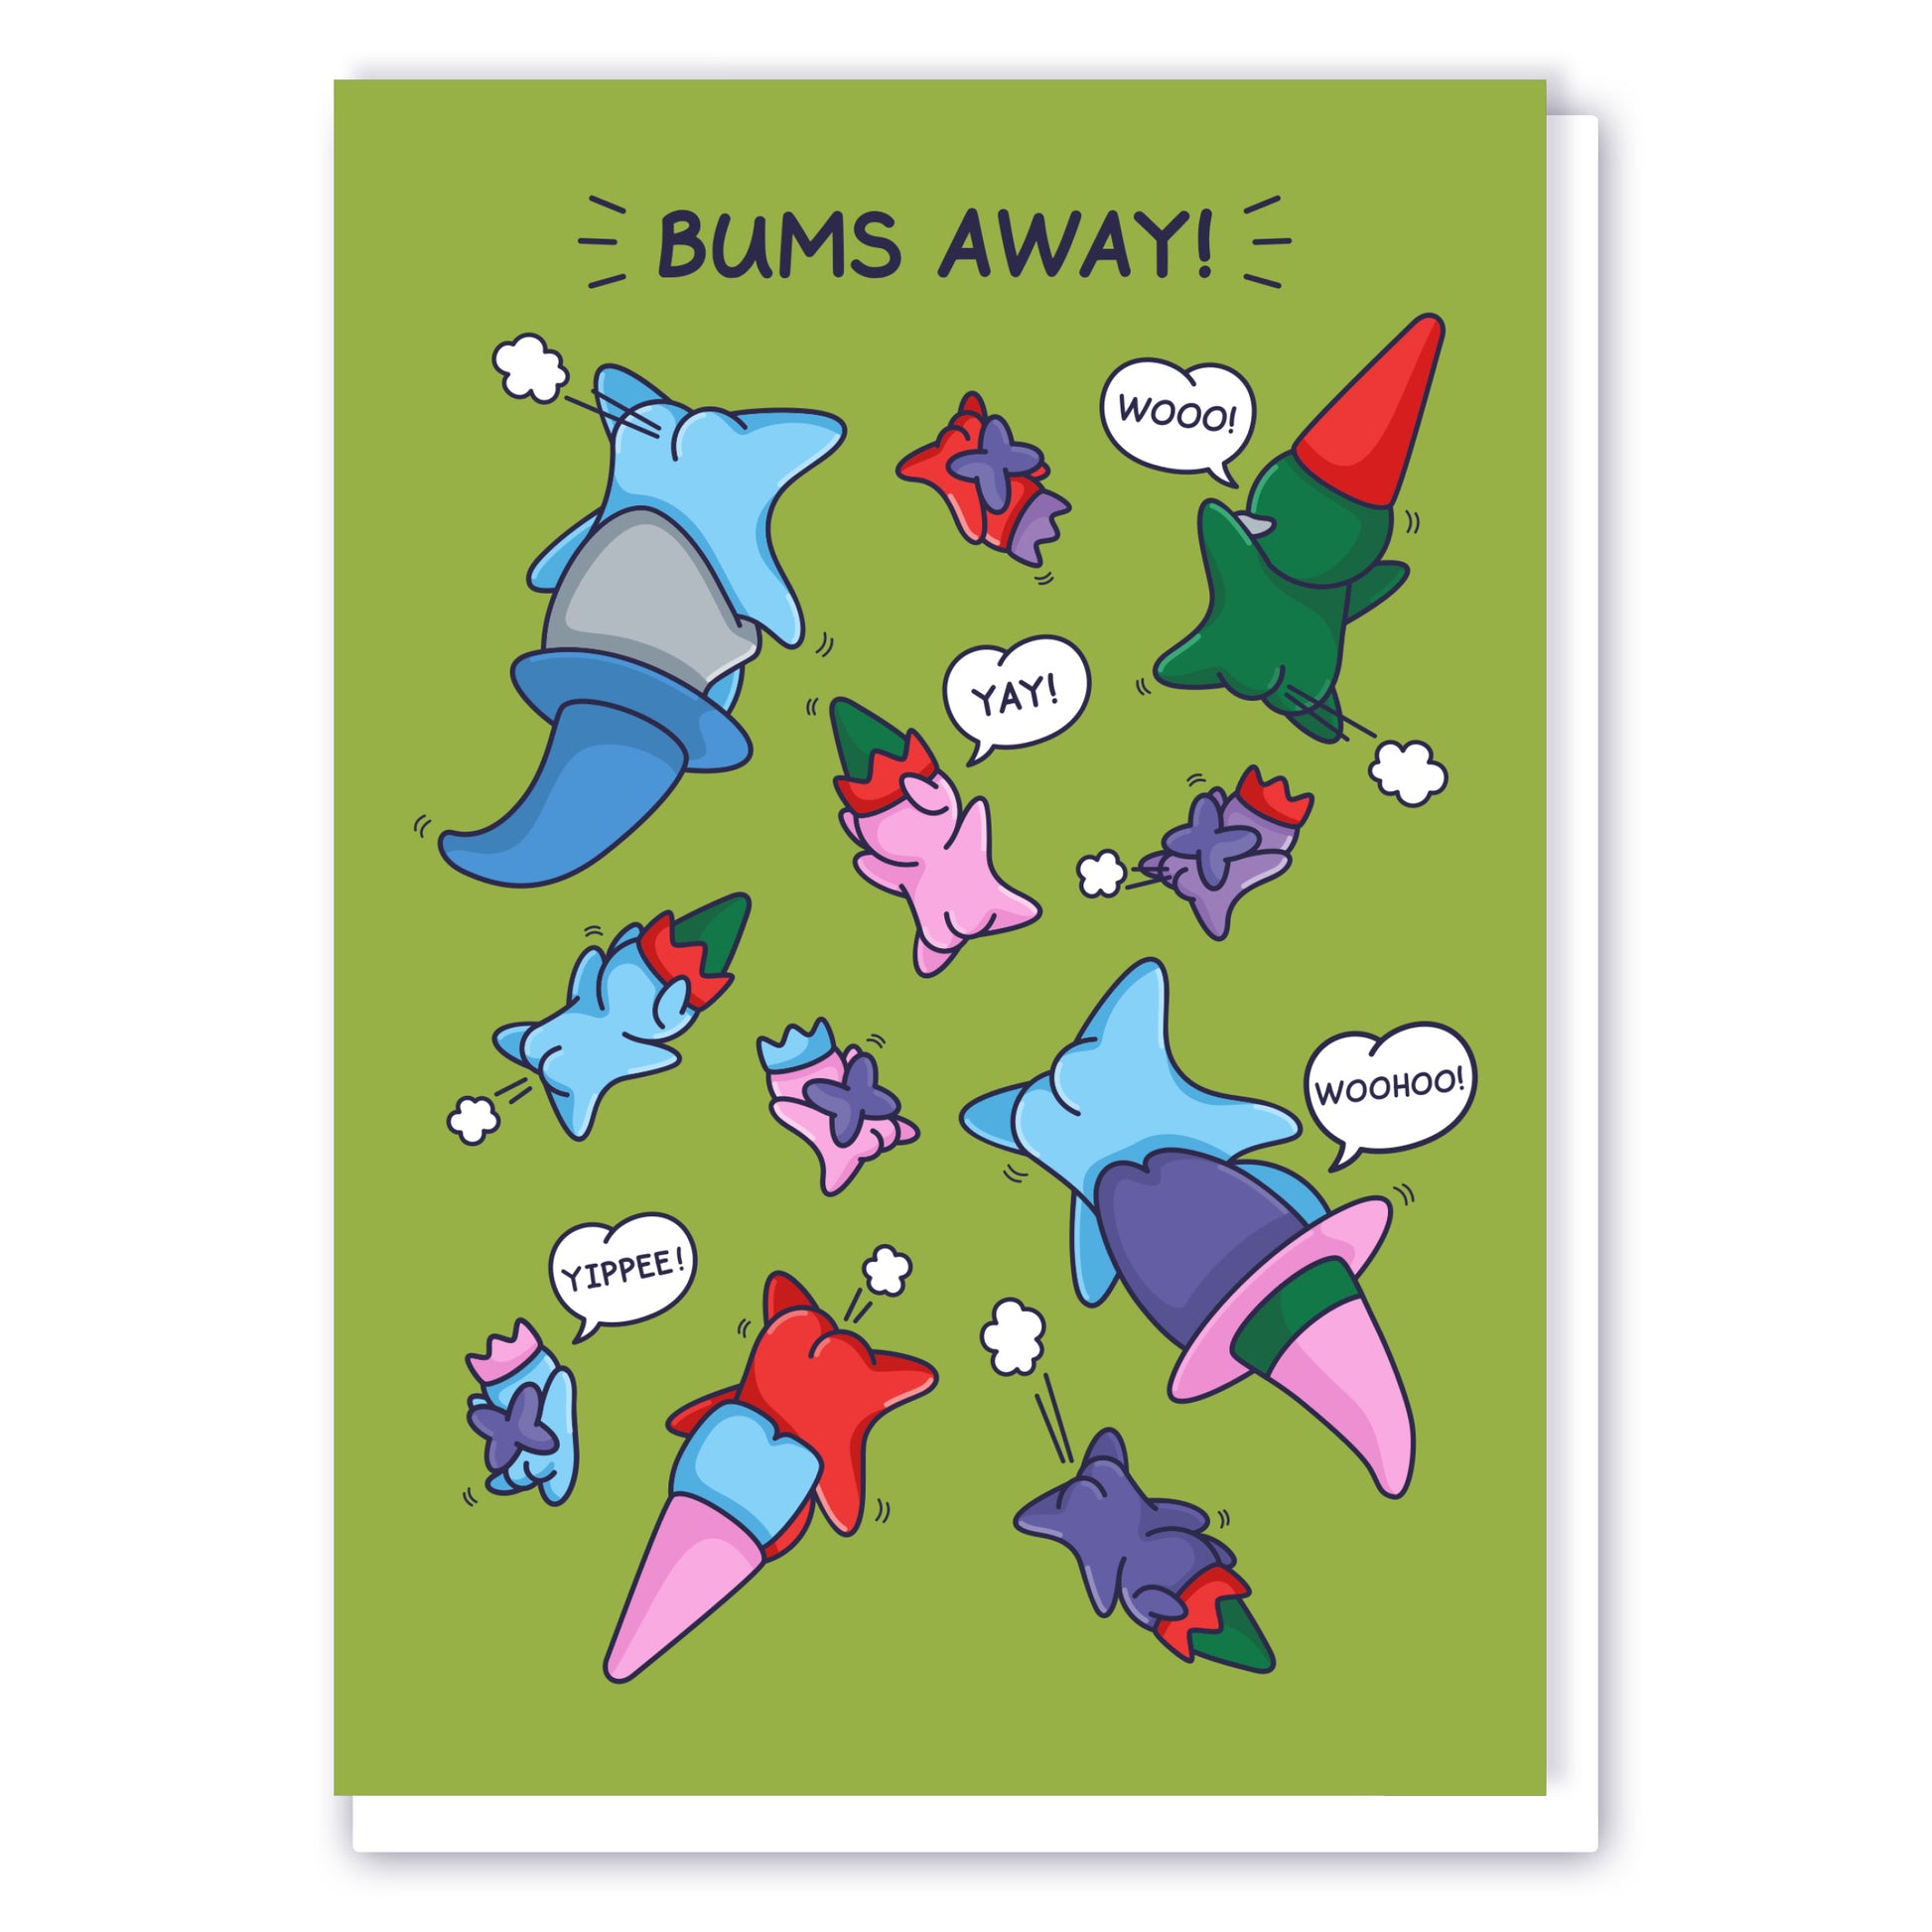 This Cheeky Legends card features cute and funny characters, such as wizards and gnomes falling through the sky farting and cheering with the caption 'Bums Away!'